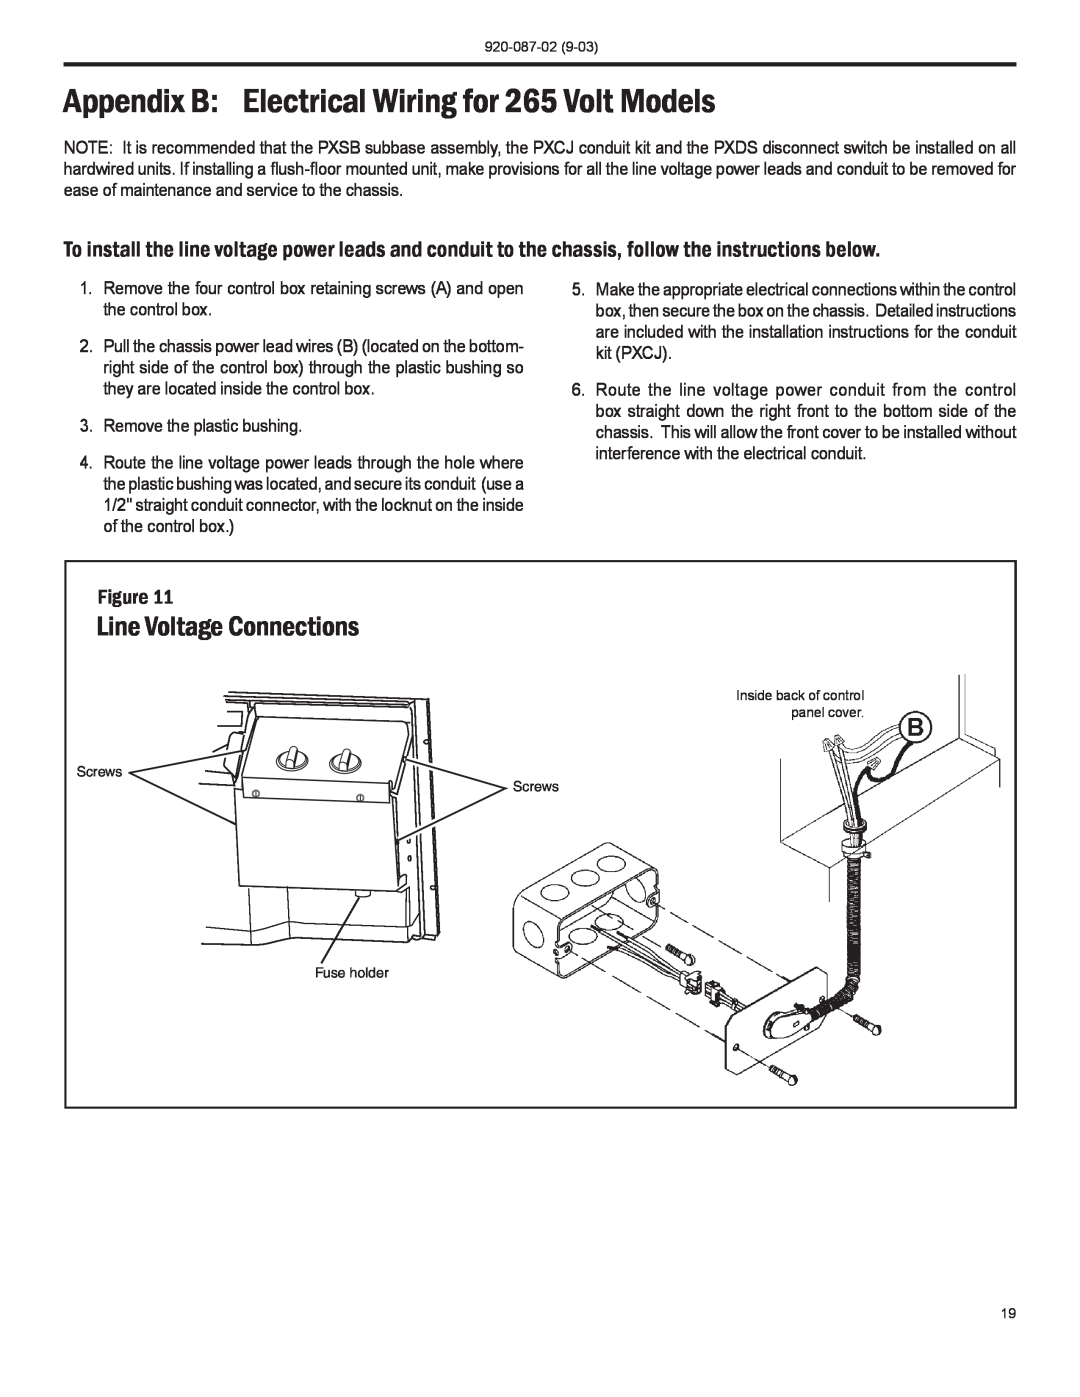 Friedrich PTAC operation manual Appendix B Electrical Wiring for 265 Volt Models, Line Voltage Connections 